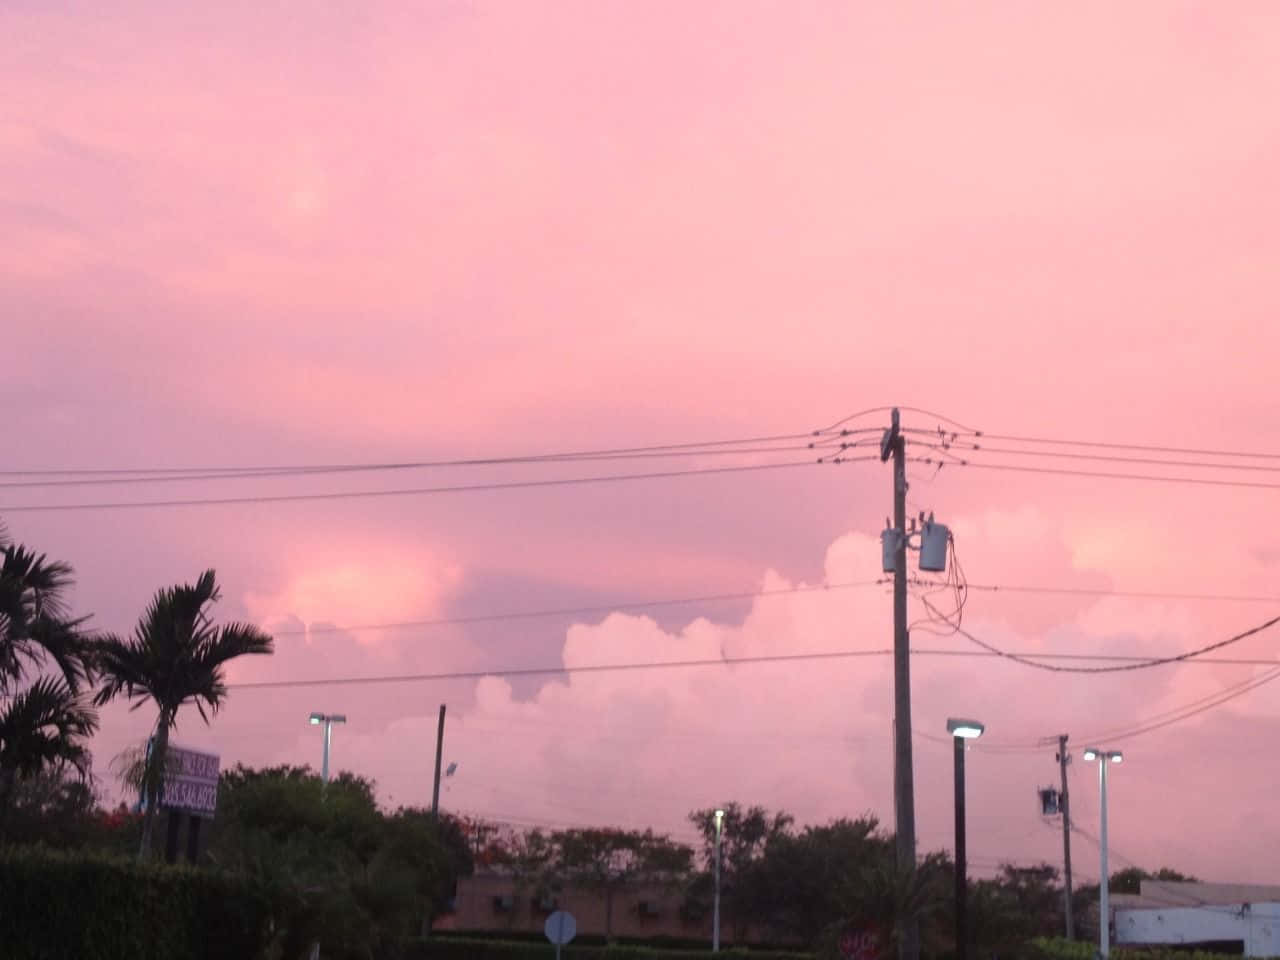 A pink sky with clouds and palm trees - Pink